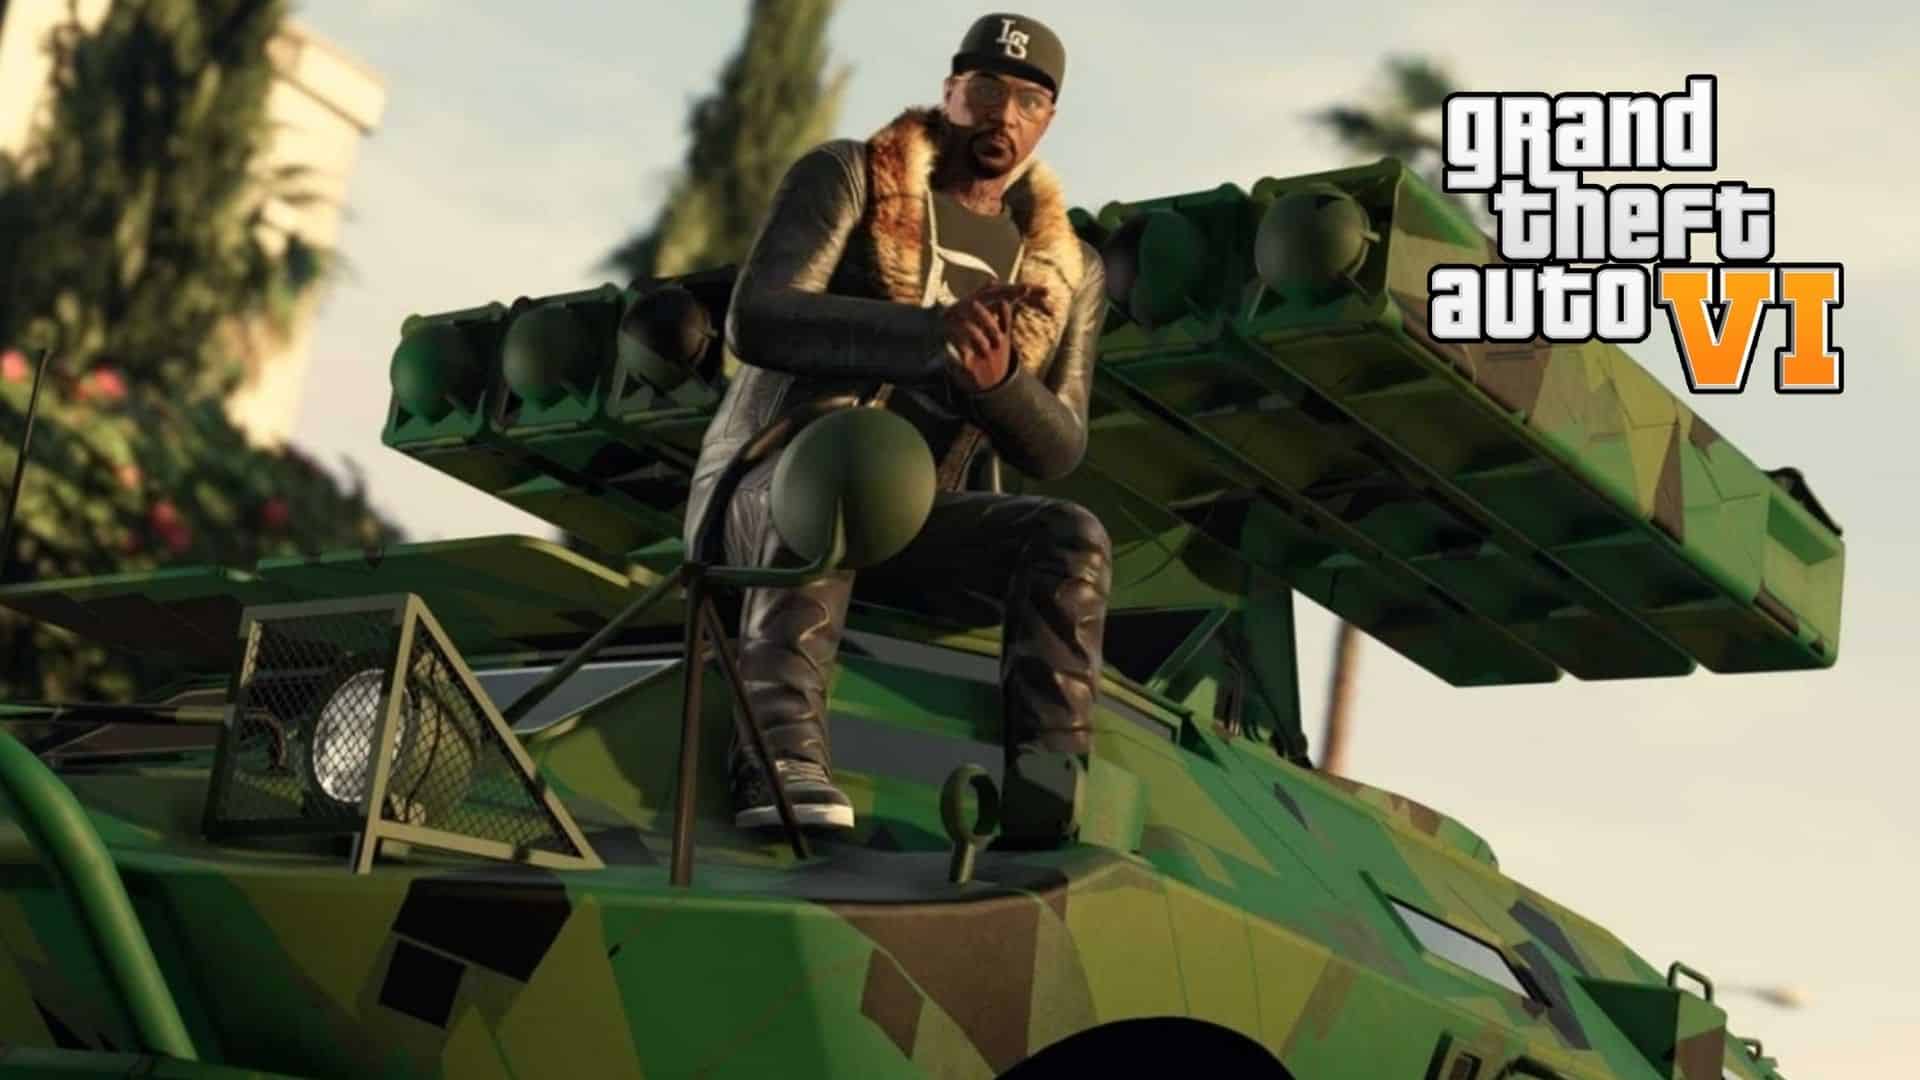 GTA character sat on a military vehicle